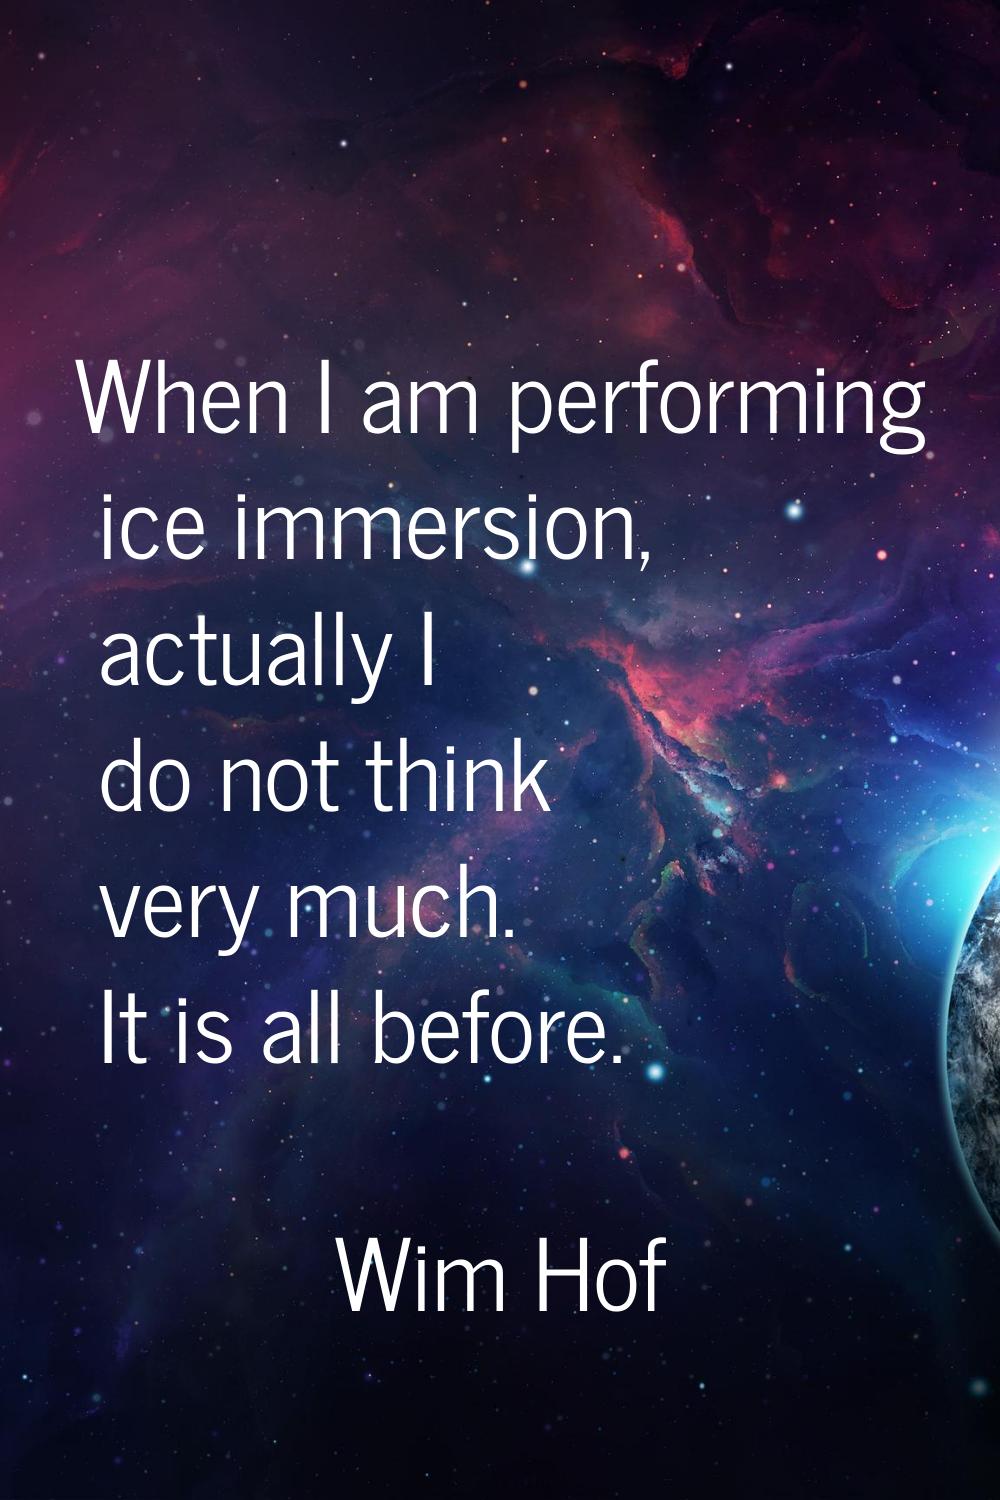 When I am performing ice immersion, actually I do not think very much. It is all before.